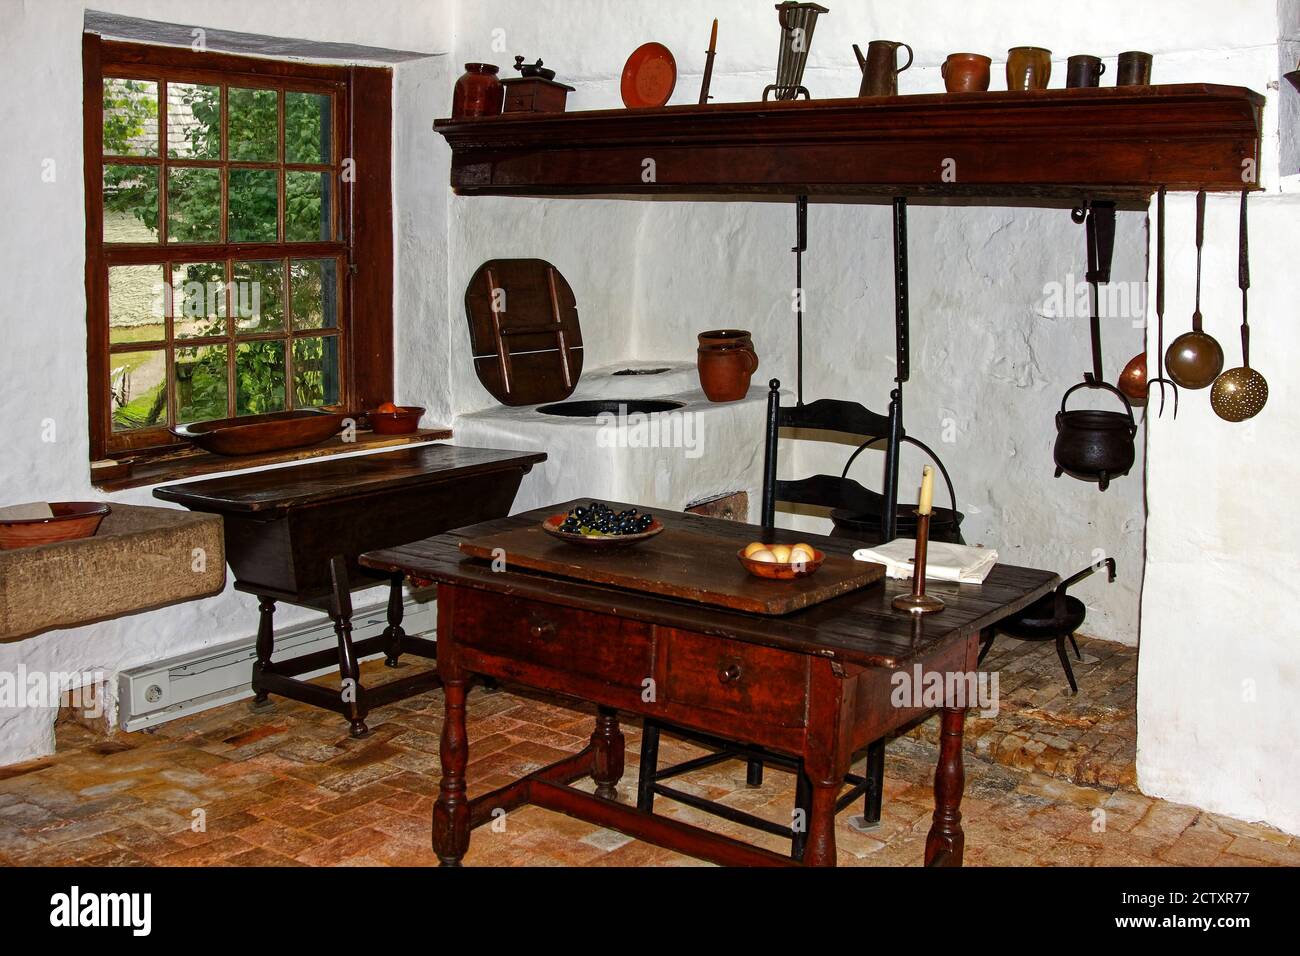 old kitchen, hearth, antique cooking implements, old table, oven, dough box, Saron, Sisters' House, Ephrata Cloister, Lancaster County, Pennsylvania, Stock Photo